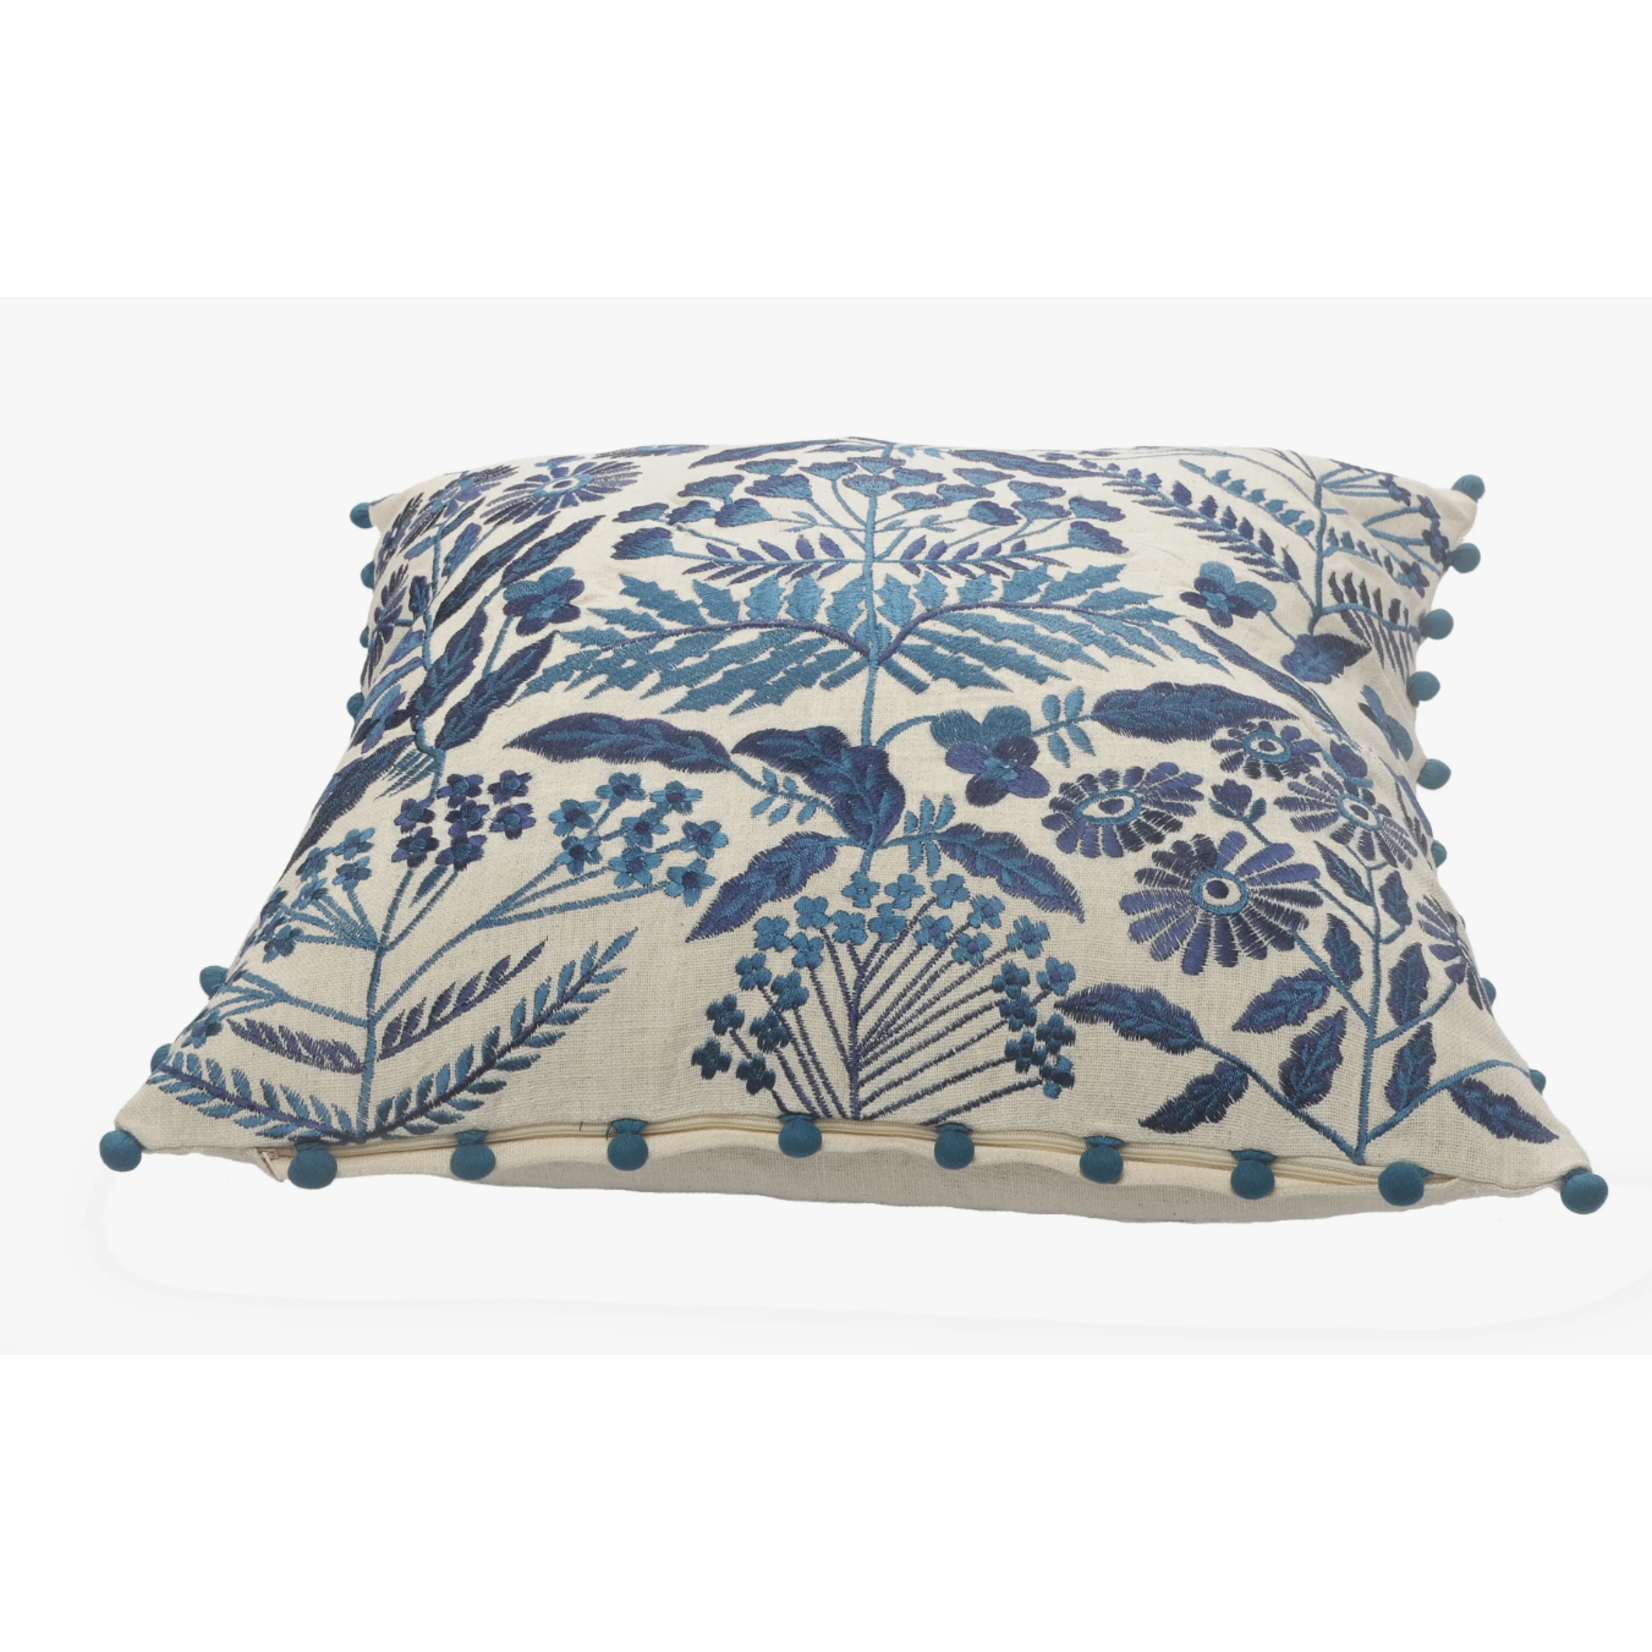 OFF-WHITE AND NAVY BOHEMIAN FLORAL THROW PILLOW